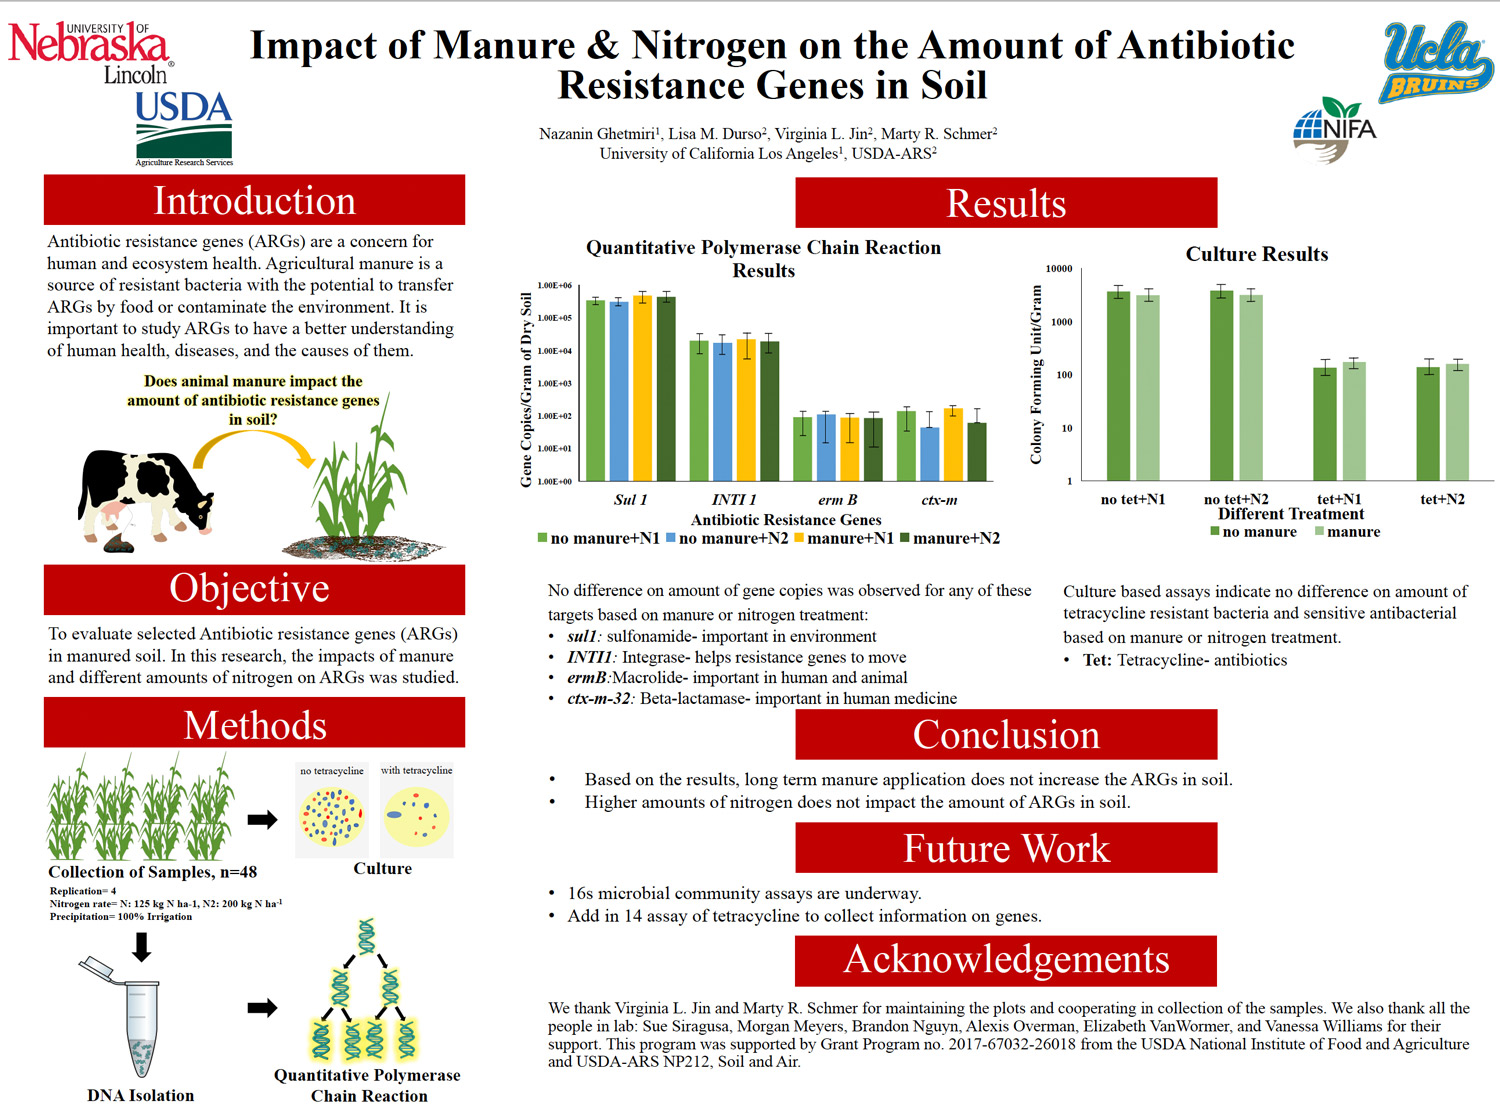 Impact of Manure & Nitrogen on the Amount of Antibiotic Resistance Genes in Soil poster